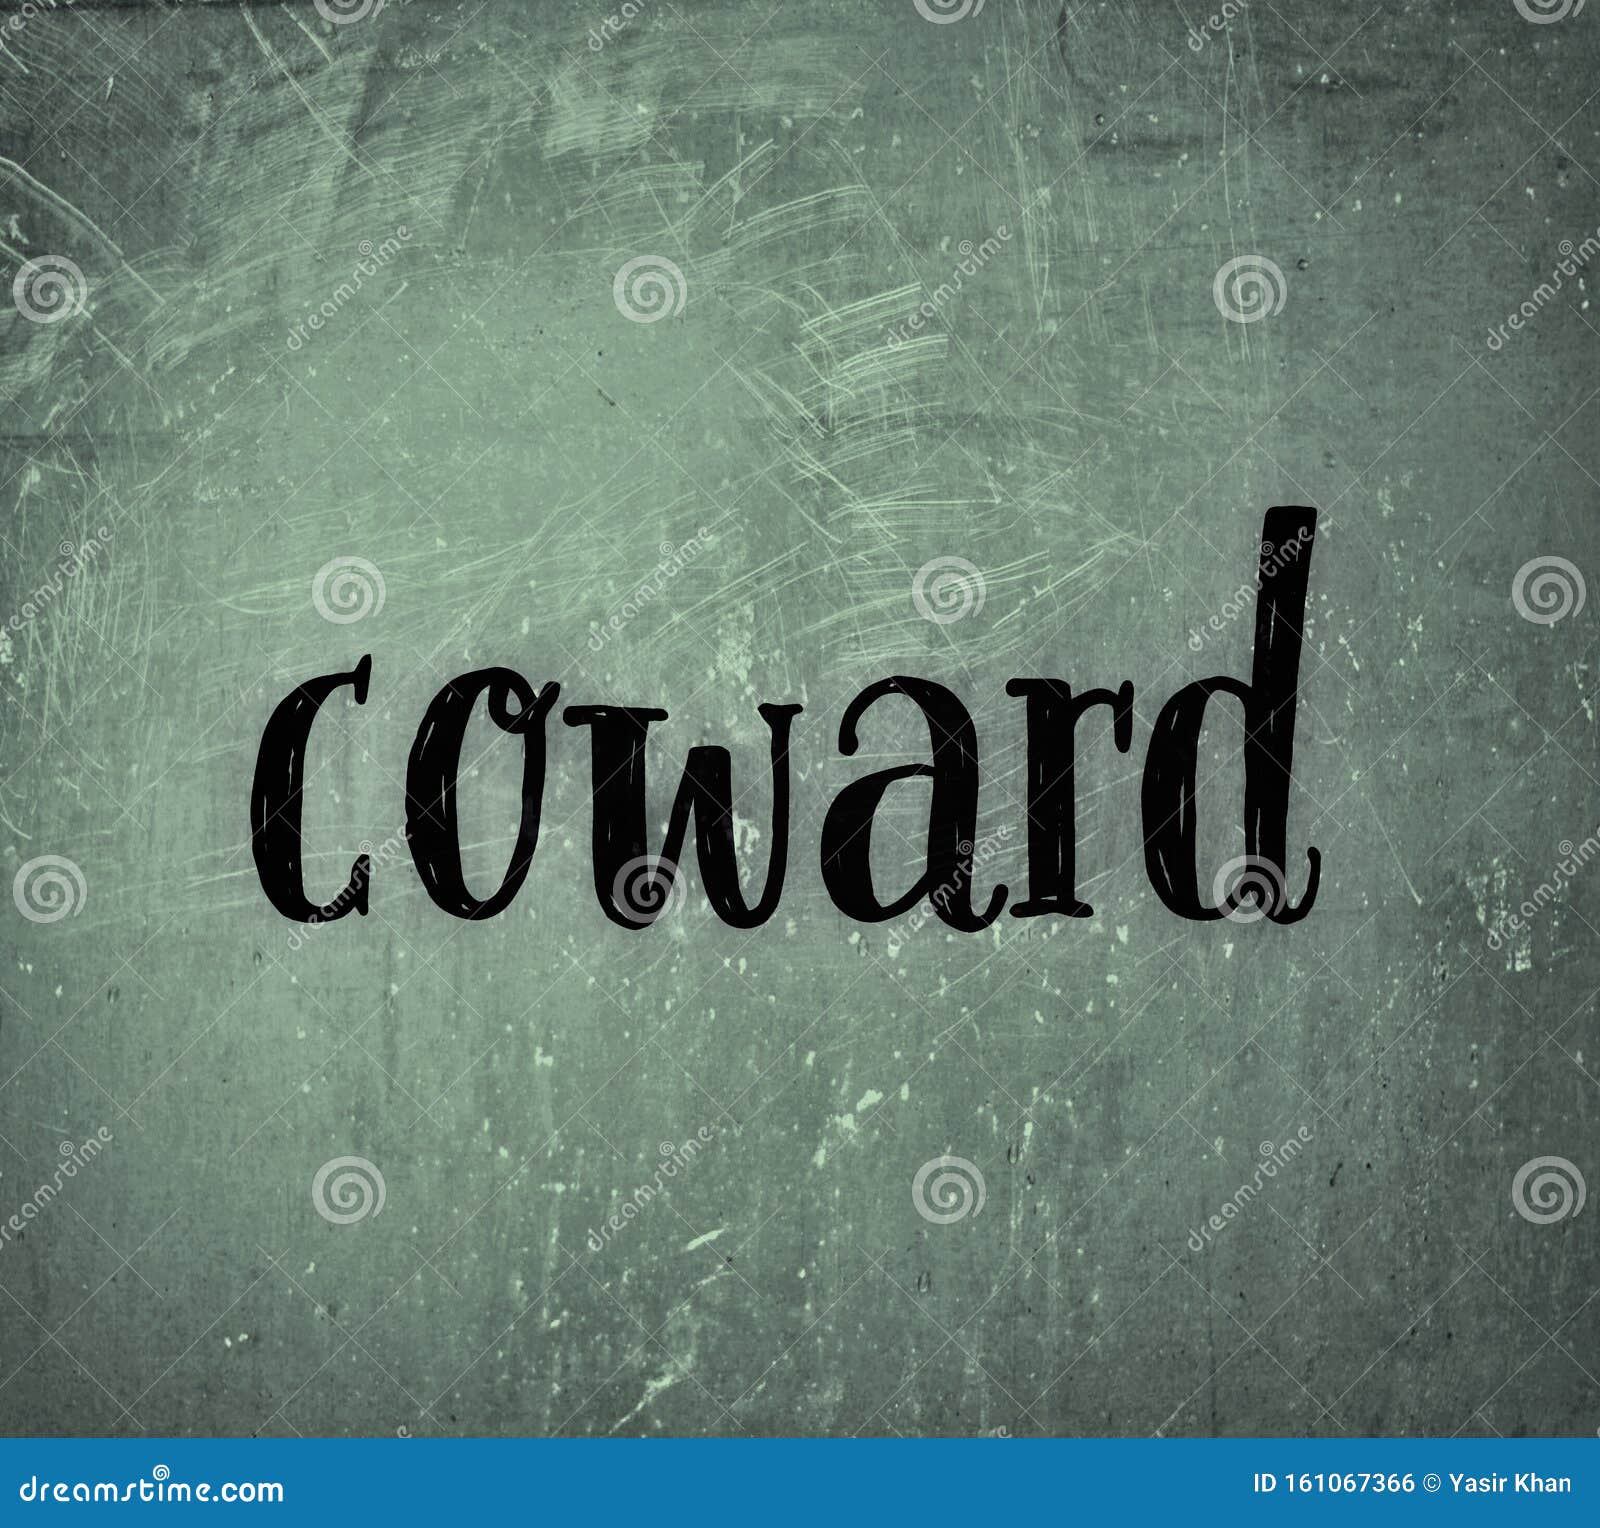 scratch and grunge background the word coward in black color